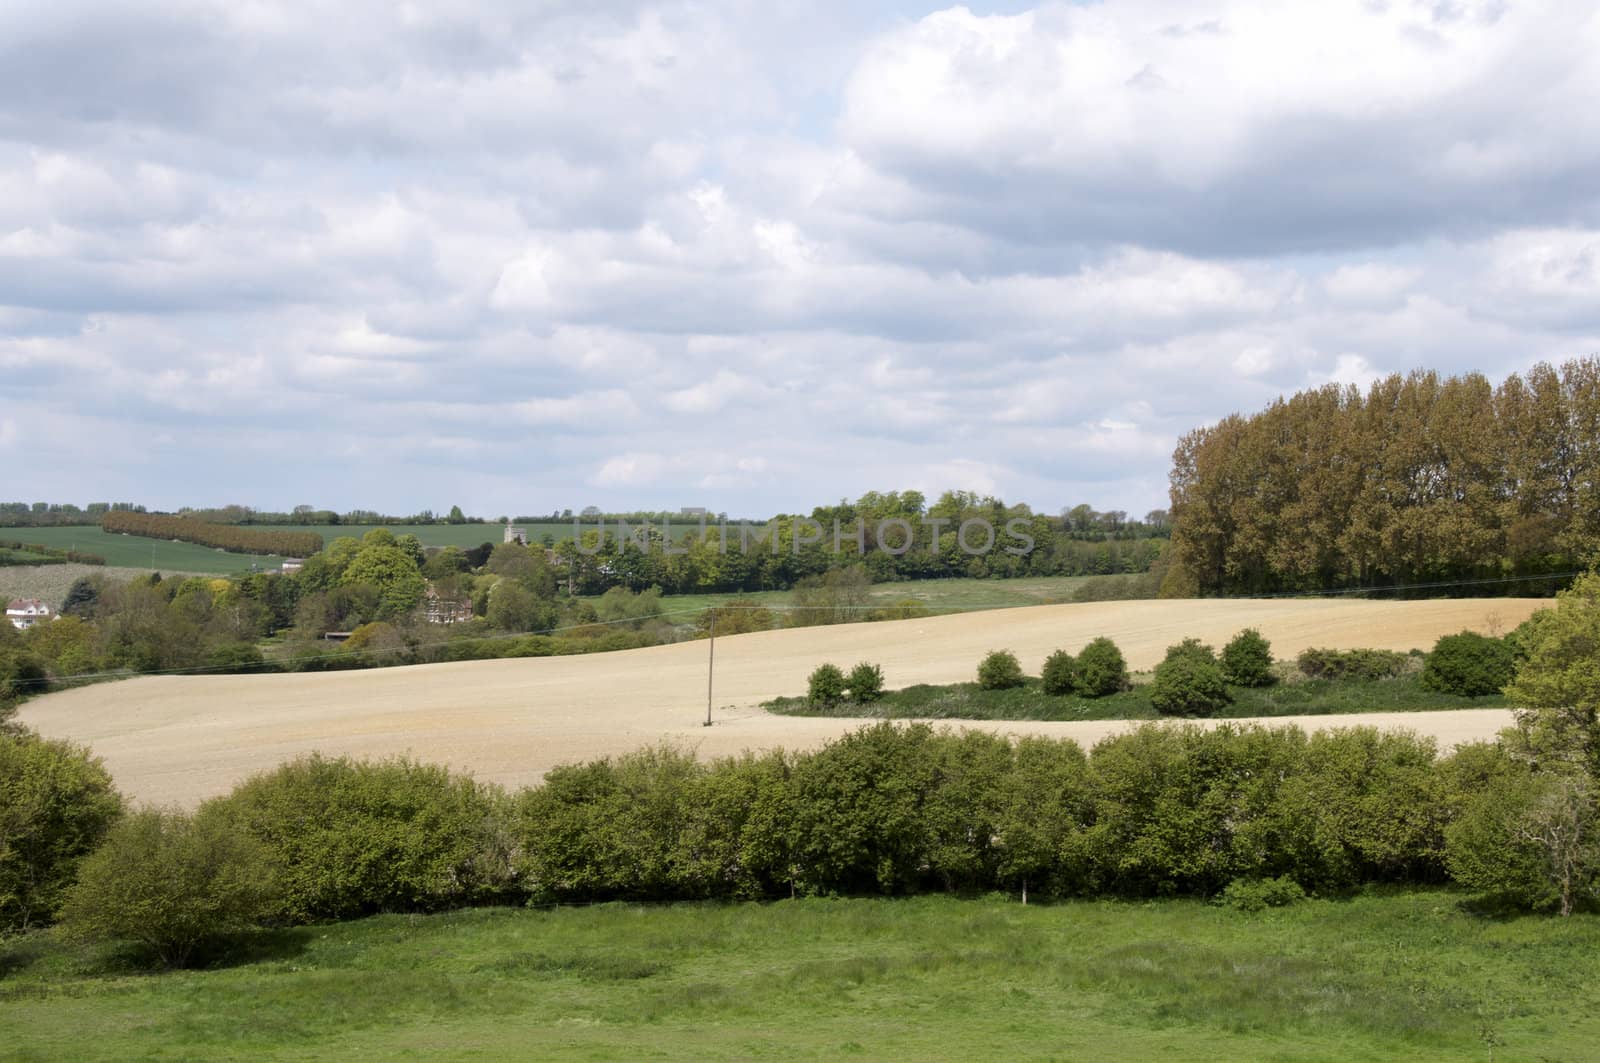 A view of the Kent countryside in spring